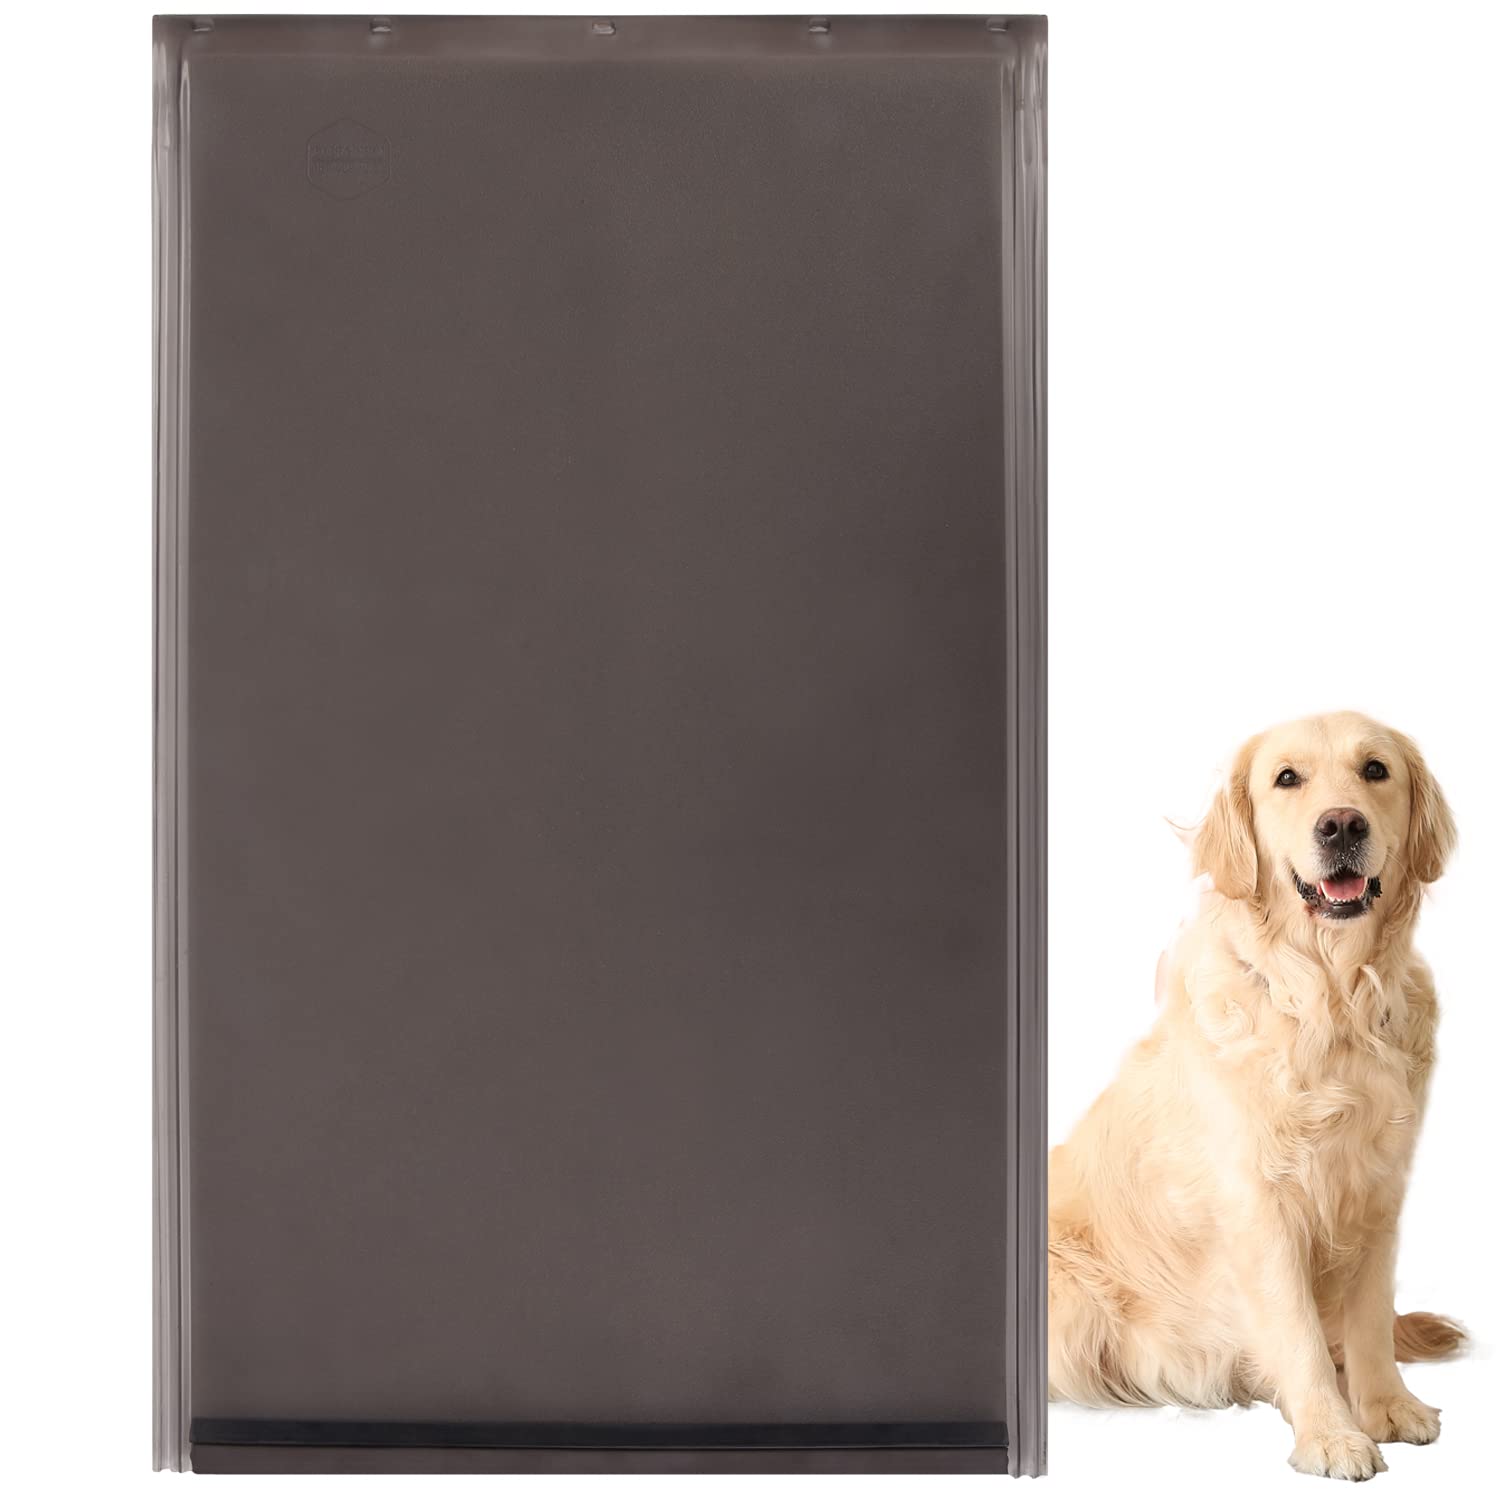 Evergreen Pet Suppli Large Replacement Dog Door Flap Compatible With Petsafe Freedom Doggie Doors Pac11-11039 - Measures 10 18 X 16 78 Made From Flex